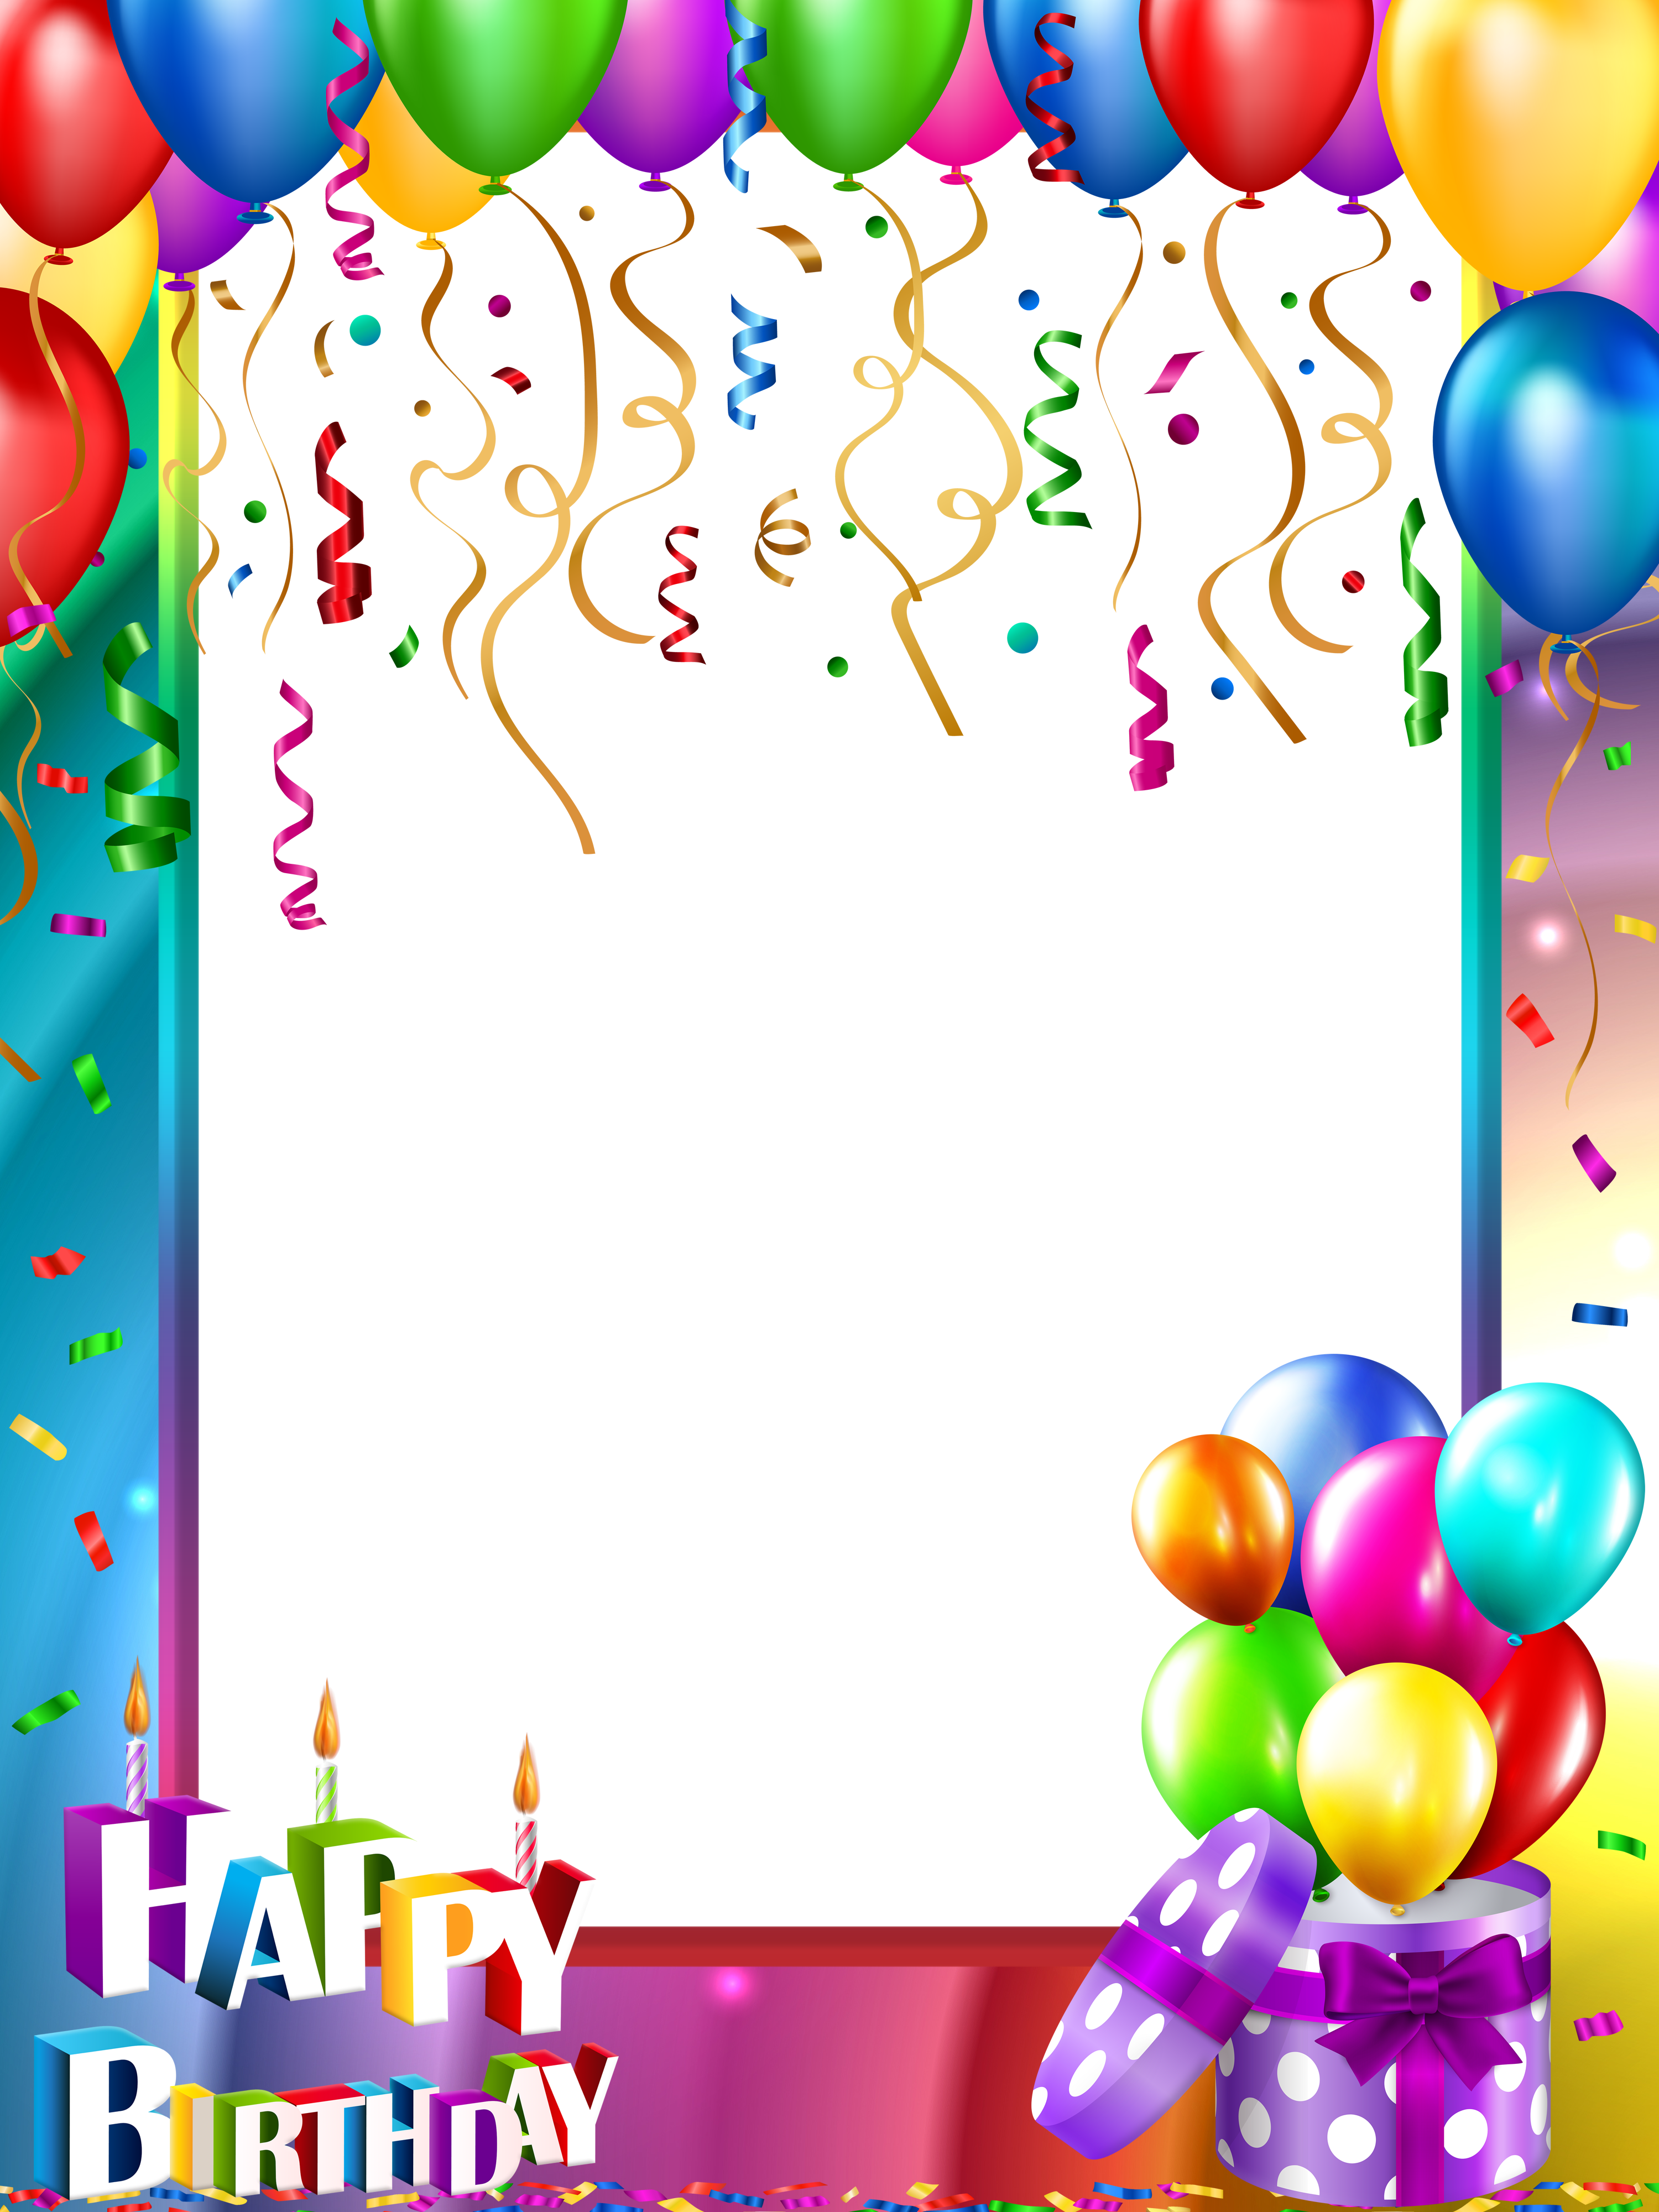 Download PNG image - Birthday Frame PNG Photos 